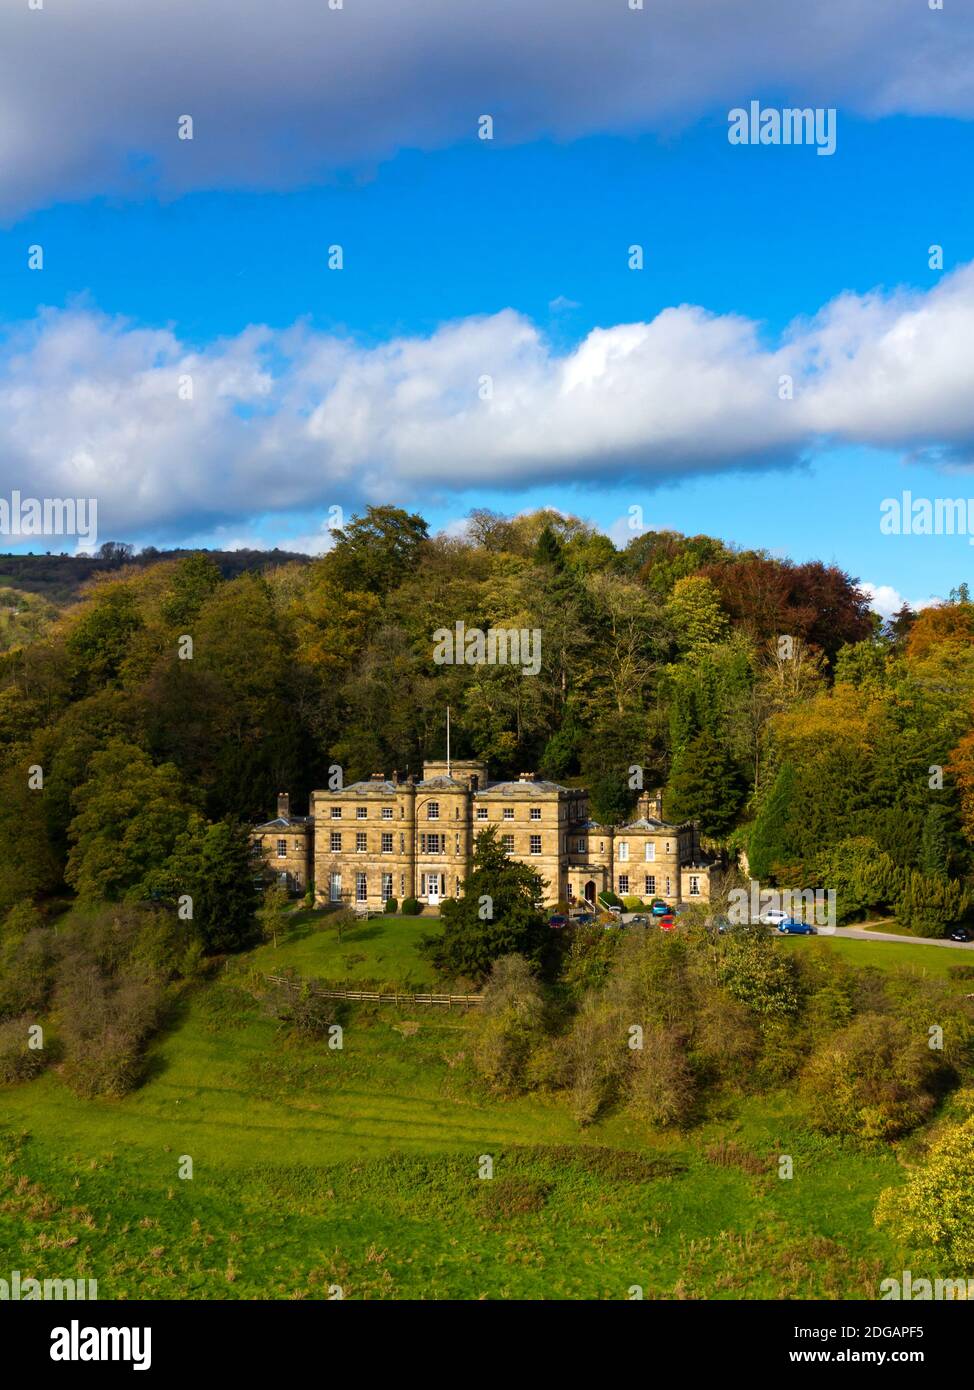 Willersley Castle a late eighteenth century Classical style castellated mansion built for Sir Richard Arkwright in Cromford Derbyshire England UK Stock Photo